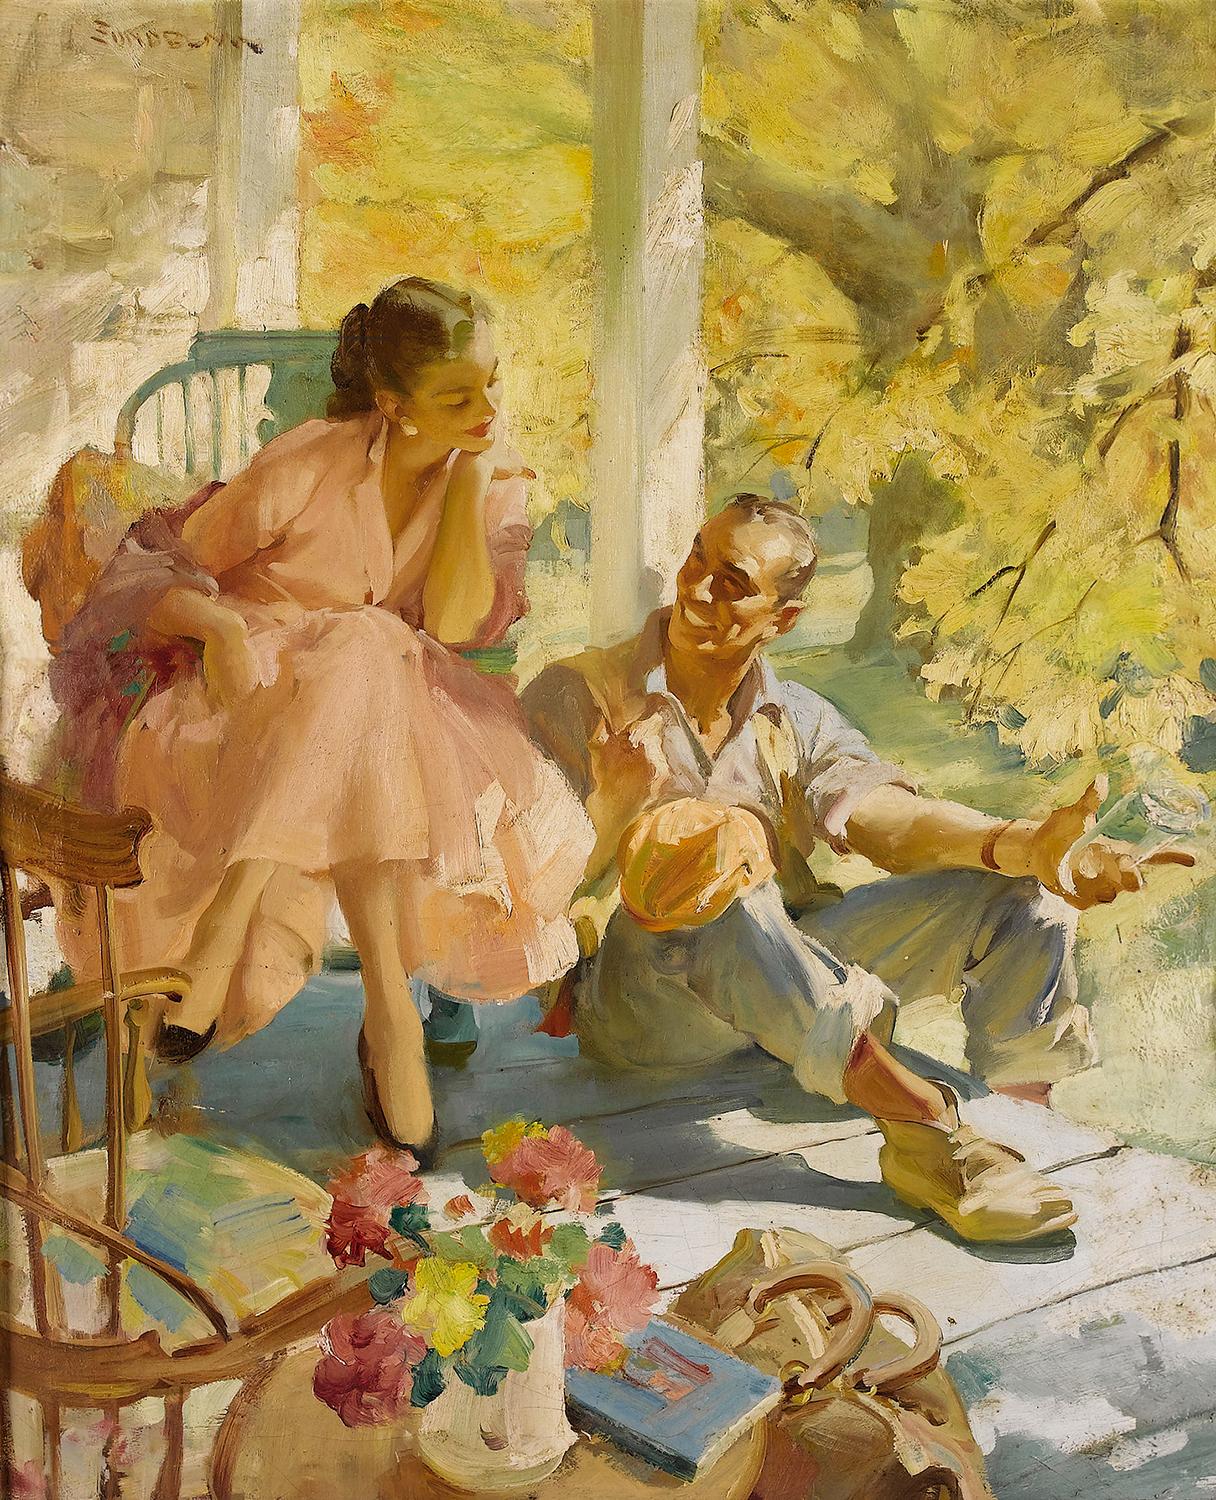 End of the Road,  Couple, Ladies Home Journal, Golden Age of Illustration  - Painting by Haddon Hubbard Sundblom